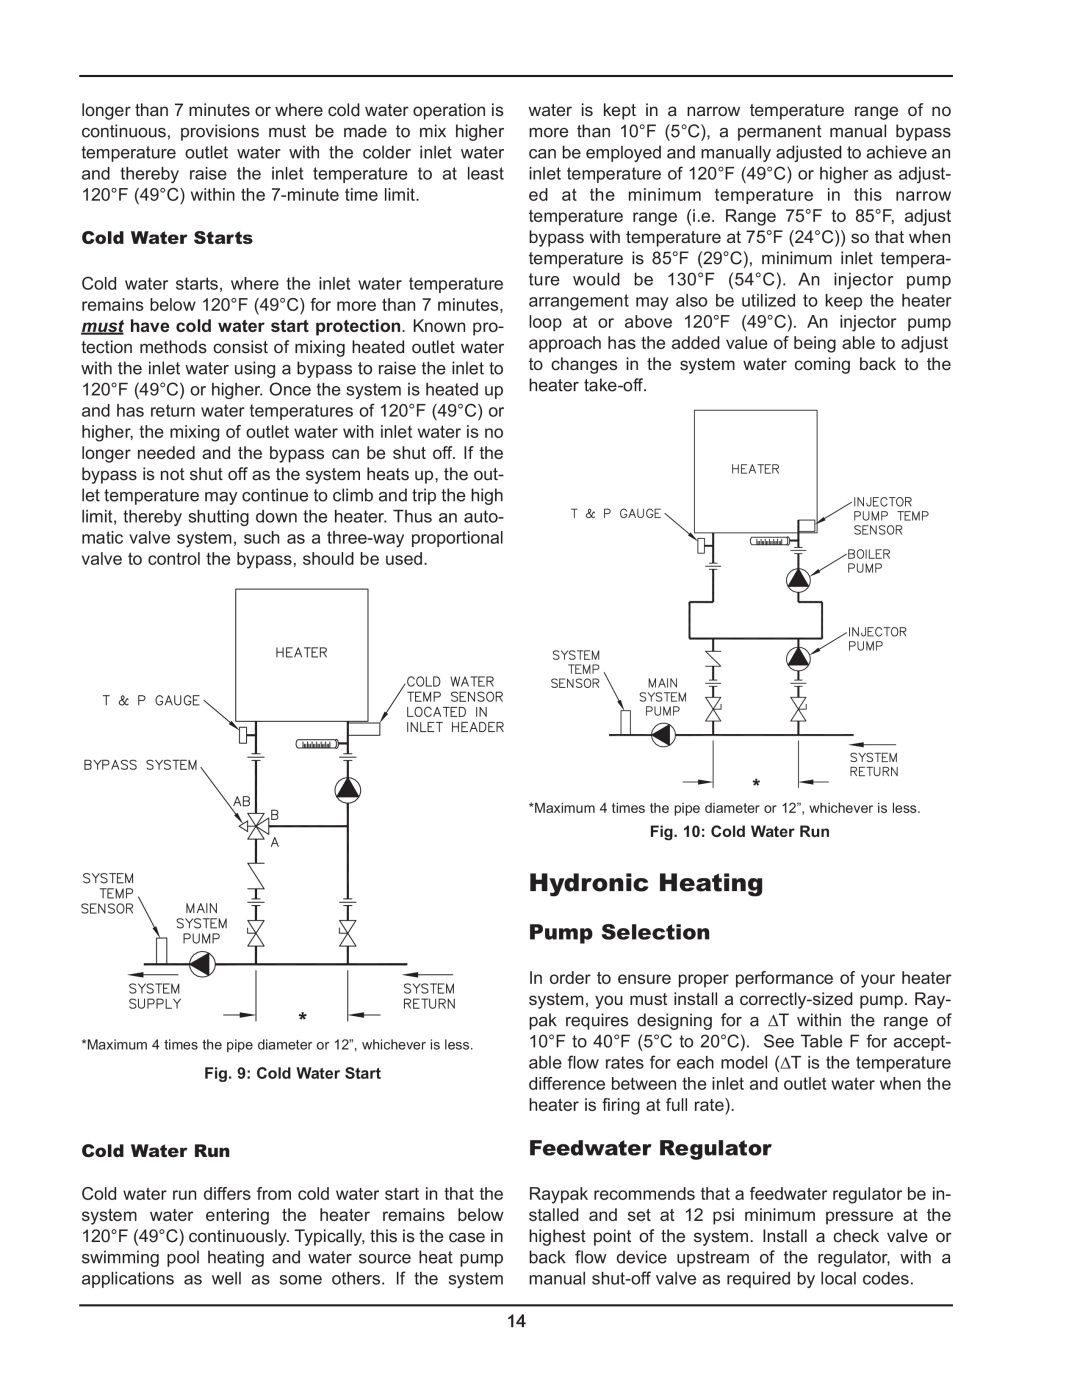 Raypak 503-2003 manual Hydronic Heating, Pump Selection, Feedwater Regulator, Cold Water Starts, Cold Water Run 